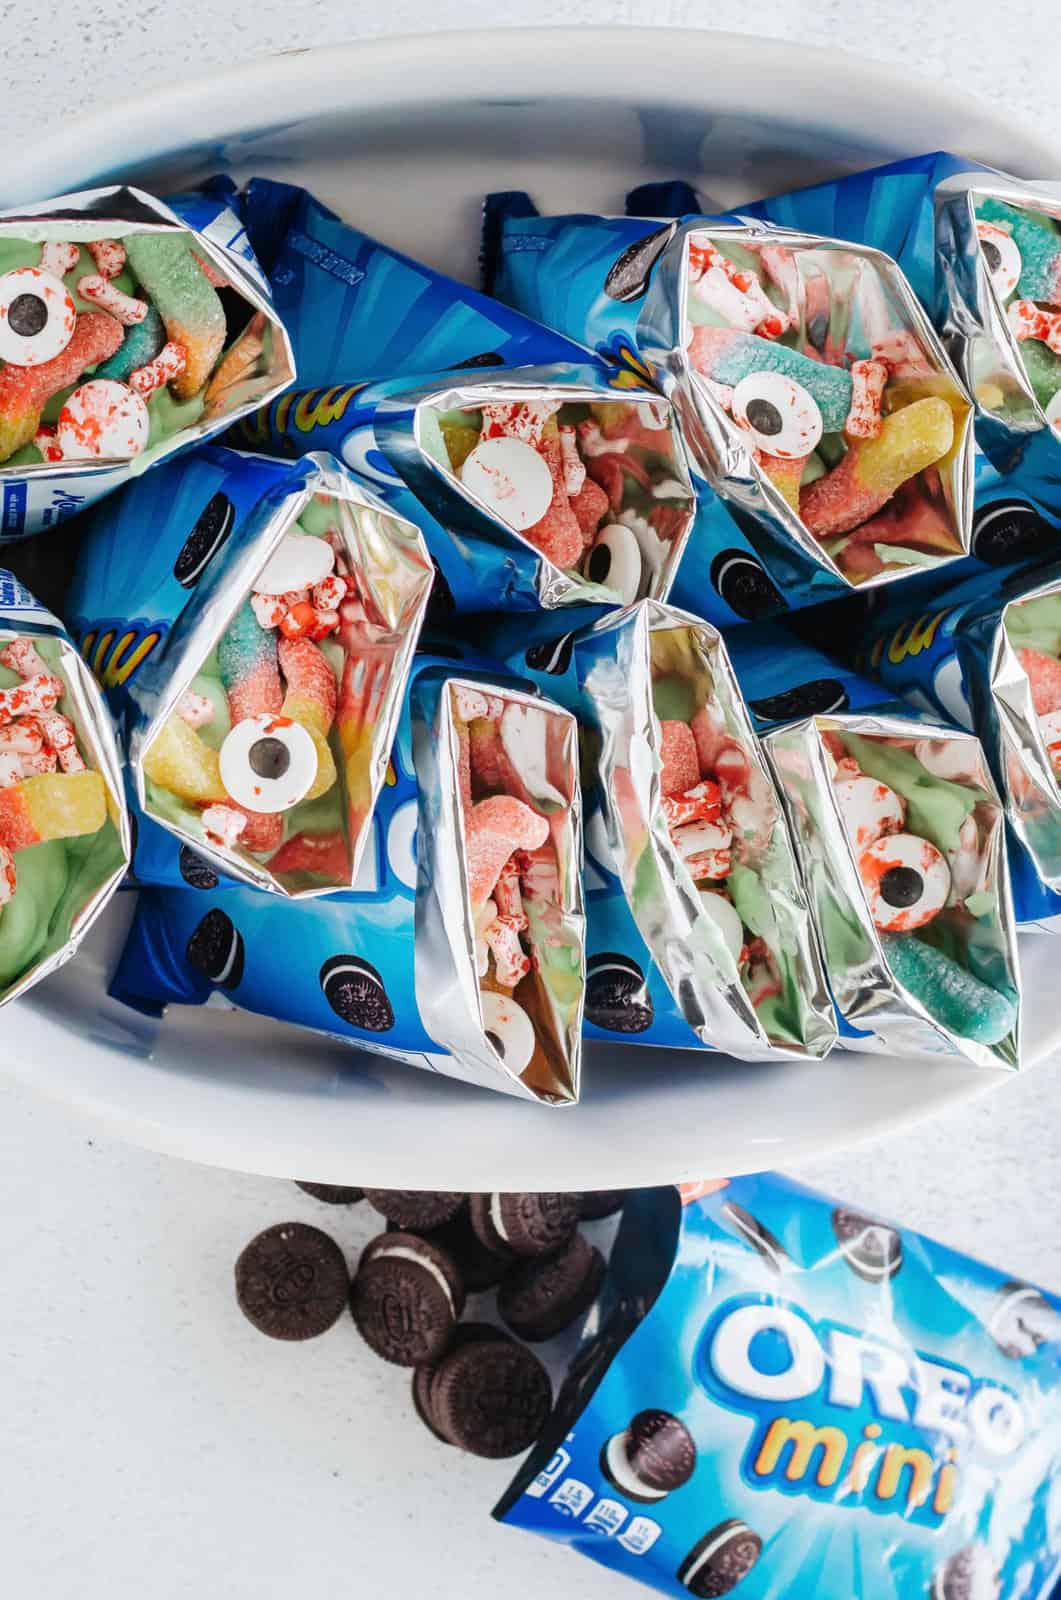 Candies placed into bags with Oreos and pudding.